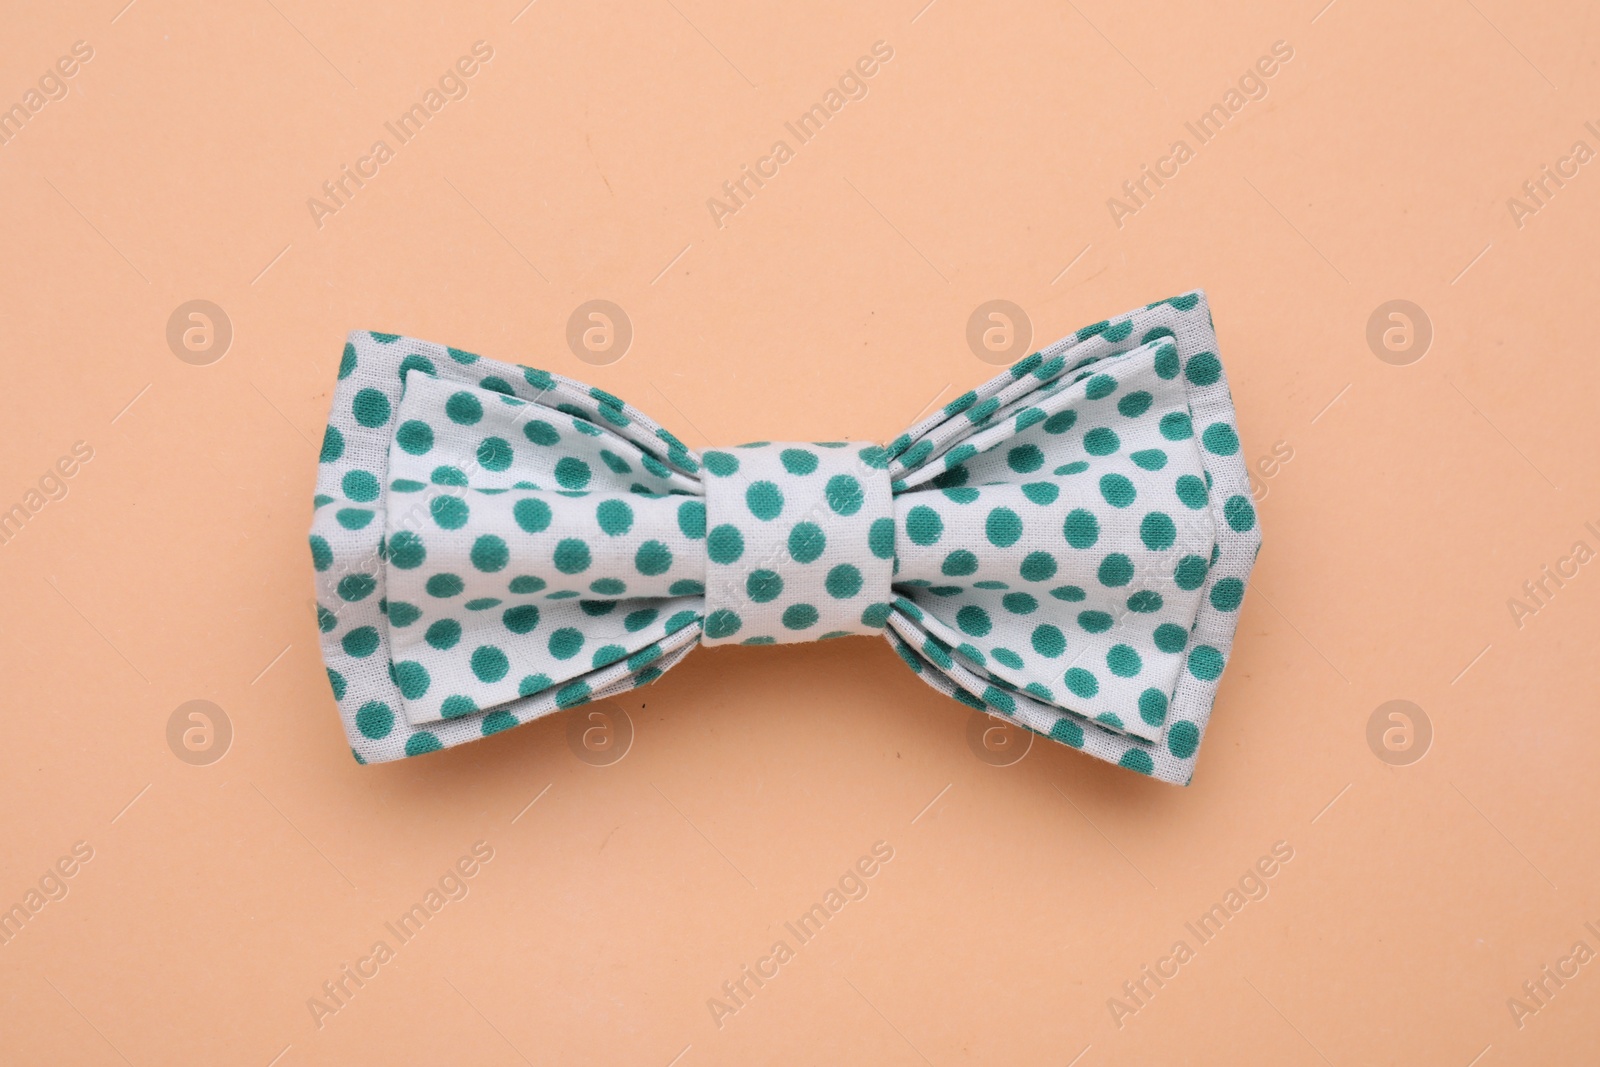 Photo of Stylish white bow tie with green polka dot pattern on pale orange background, top view